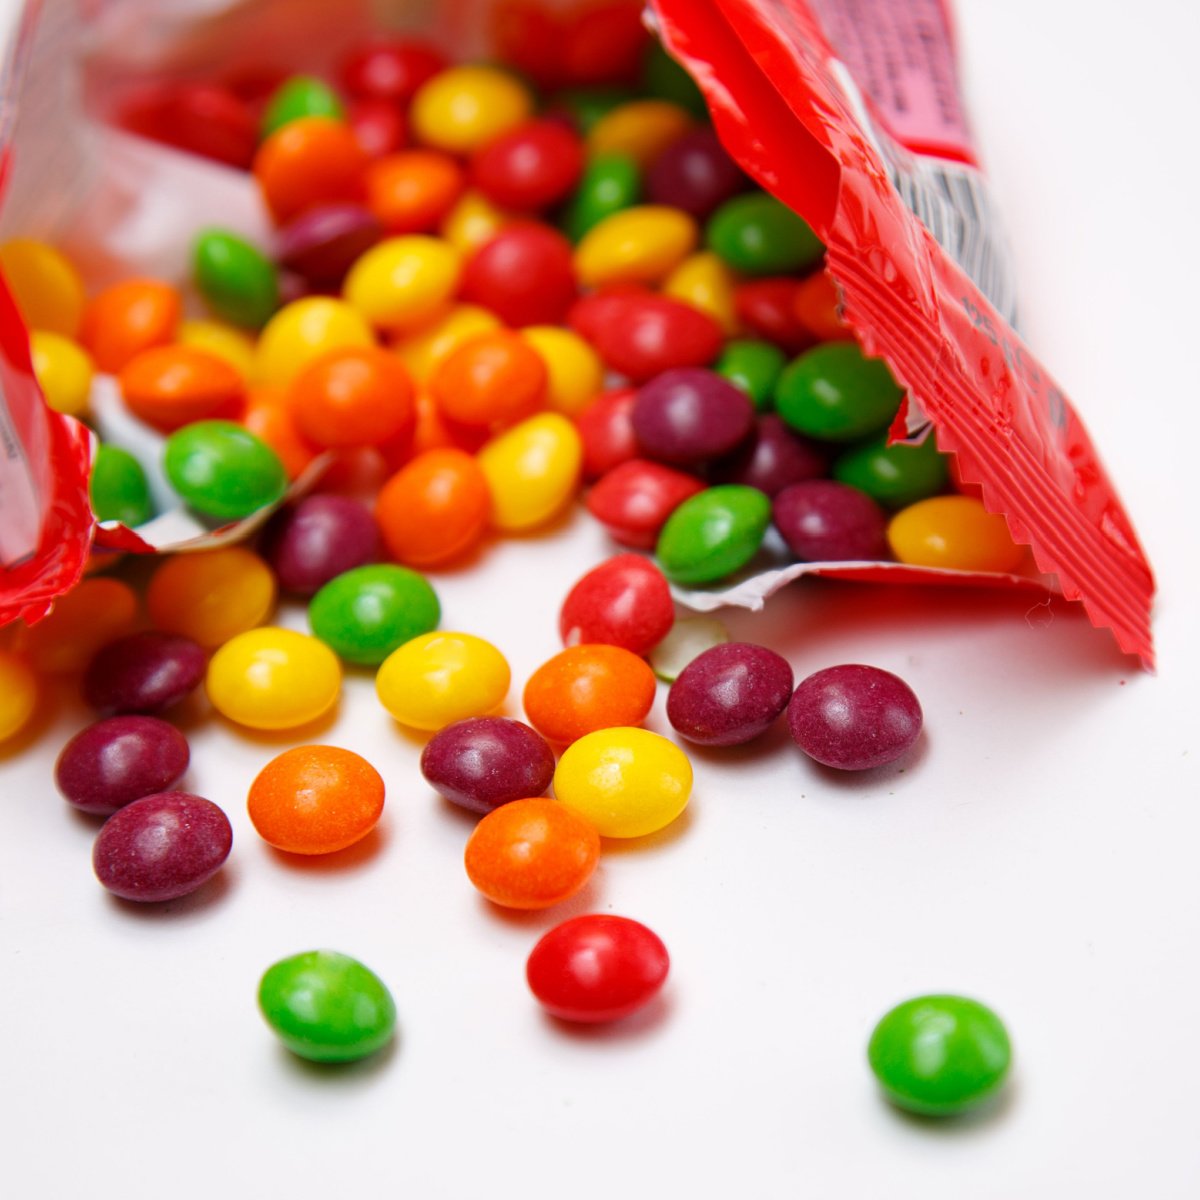 skittles spilling out of the pack